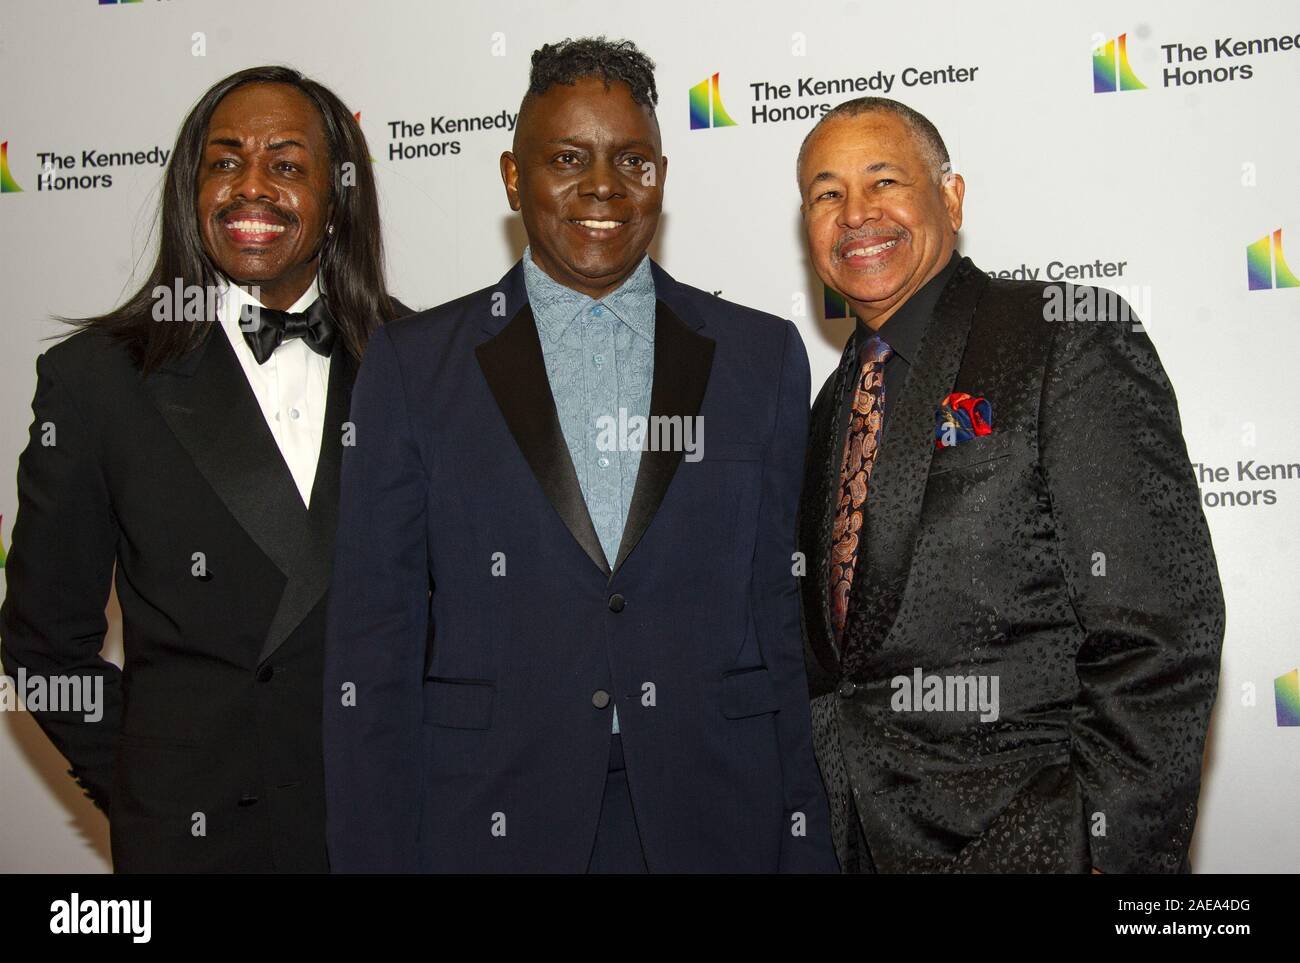 Washington, USA. 07th Dec, 2019. The band Earth, Wind & Fire, from left to right, bassist Verdine White, singer Philip Bailey, and percussionist Ralph Johnson arrive for the formal Artist's Dinner honoring the recipients of the 42nd Annual Kennedy Center Honors at the USA Department of State in Washington, DC on Saturday, December 7, 2019. The 2019 honorees are: Earth, Wind & Fire, Sally Field, Linda Ronstadt, Sesame Street, and Michael Tilson Thomas.Credit: Ron Sachs/Pool via CNP Credit: UPI/Alamy Live News Stock Photo